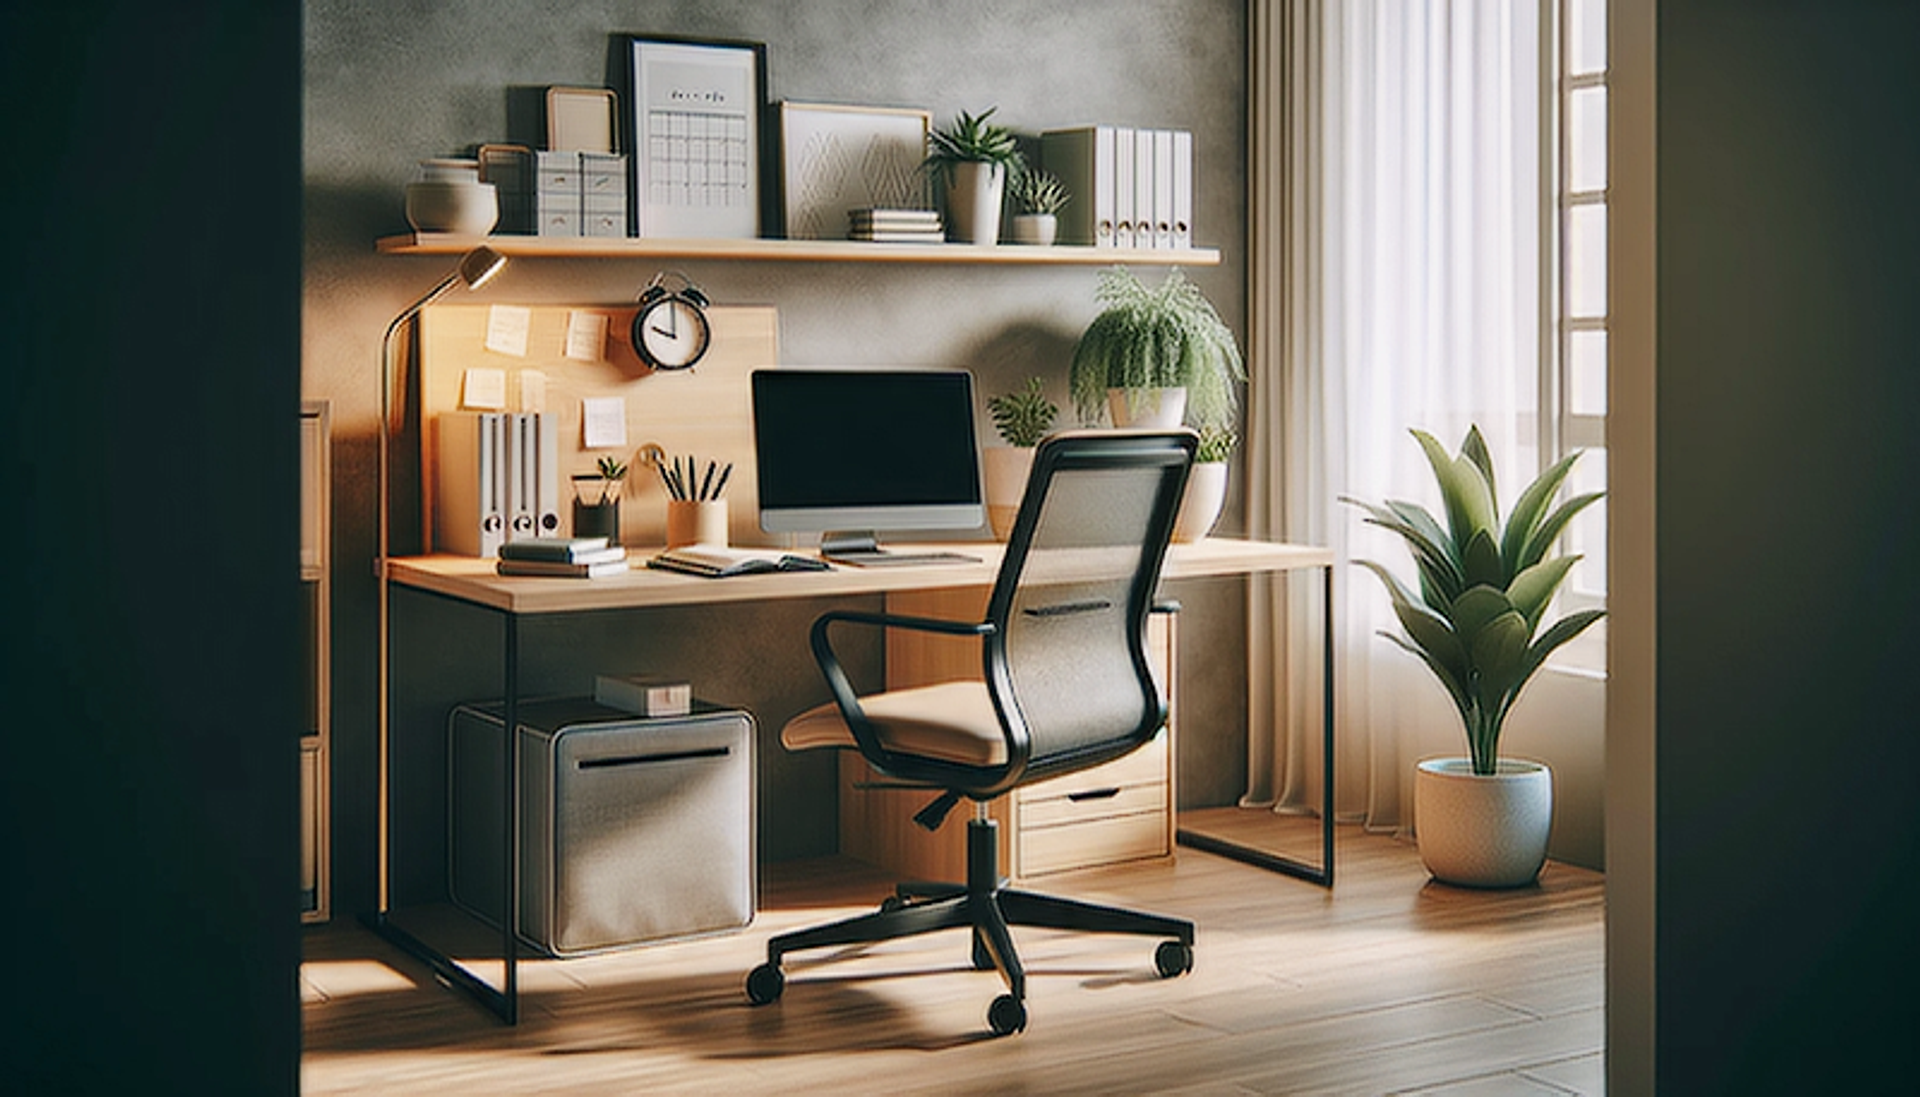 Modern and organized home office setup with ergonomic furniture and technology for enhanced productivity.